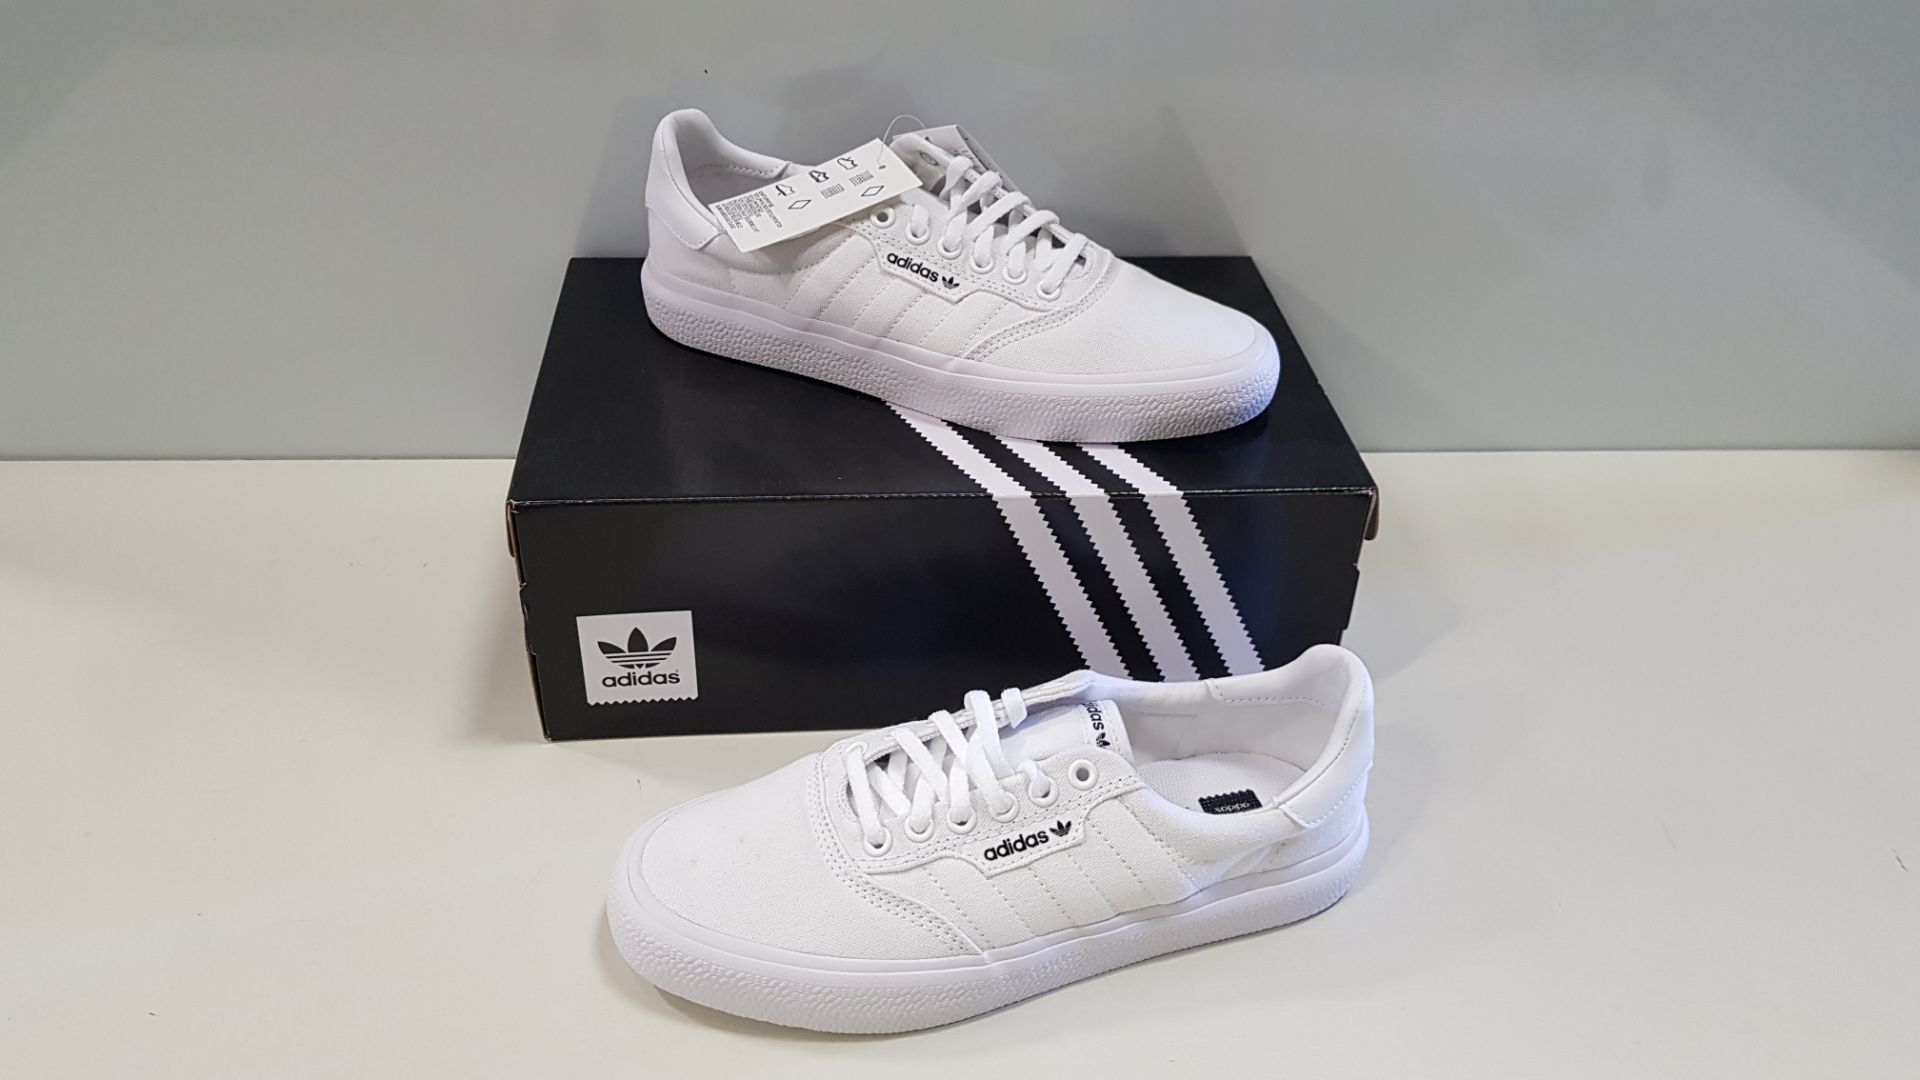 6 X BRAND NEW ADIDAS ORIGINALS TRIPLE WHITE 3MC TRAINERS UK SIZE 5.5 (PLEASE NOTE SOME SHOES ARE